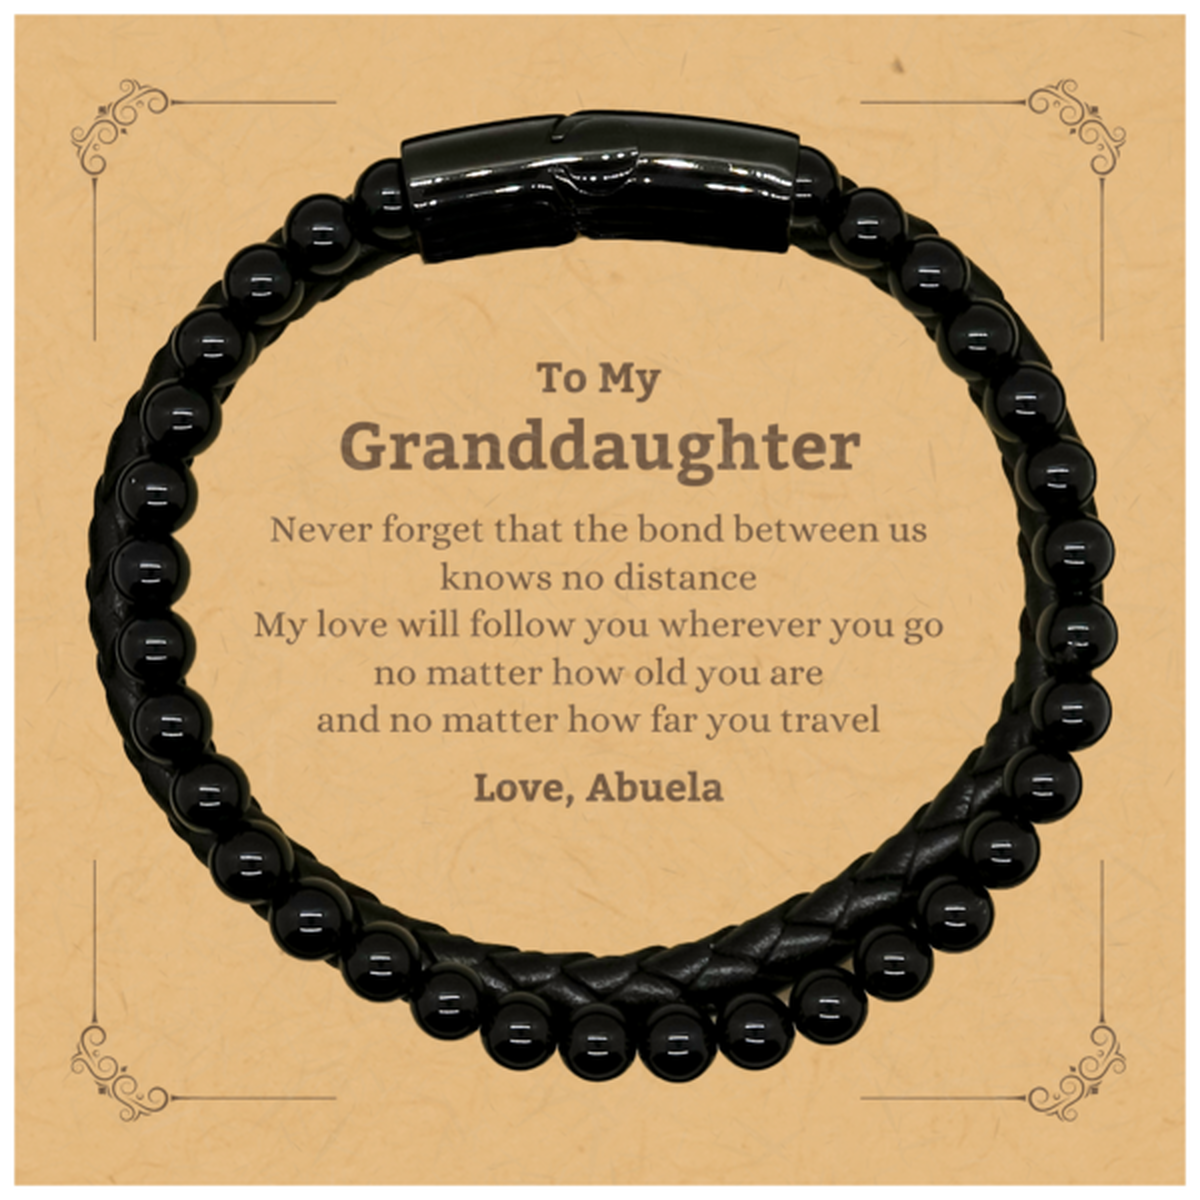 Granddaughter Birthday Gifts from Abuela, Adjustable Stone Leather Bracelets for Granddaughter Christmas Graduation Unique Gifts Granddaughter Never forget that the bond between us knows no distance. Love, Abuela